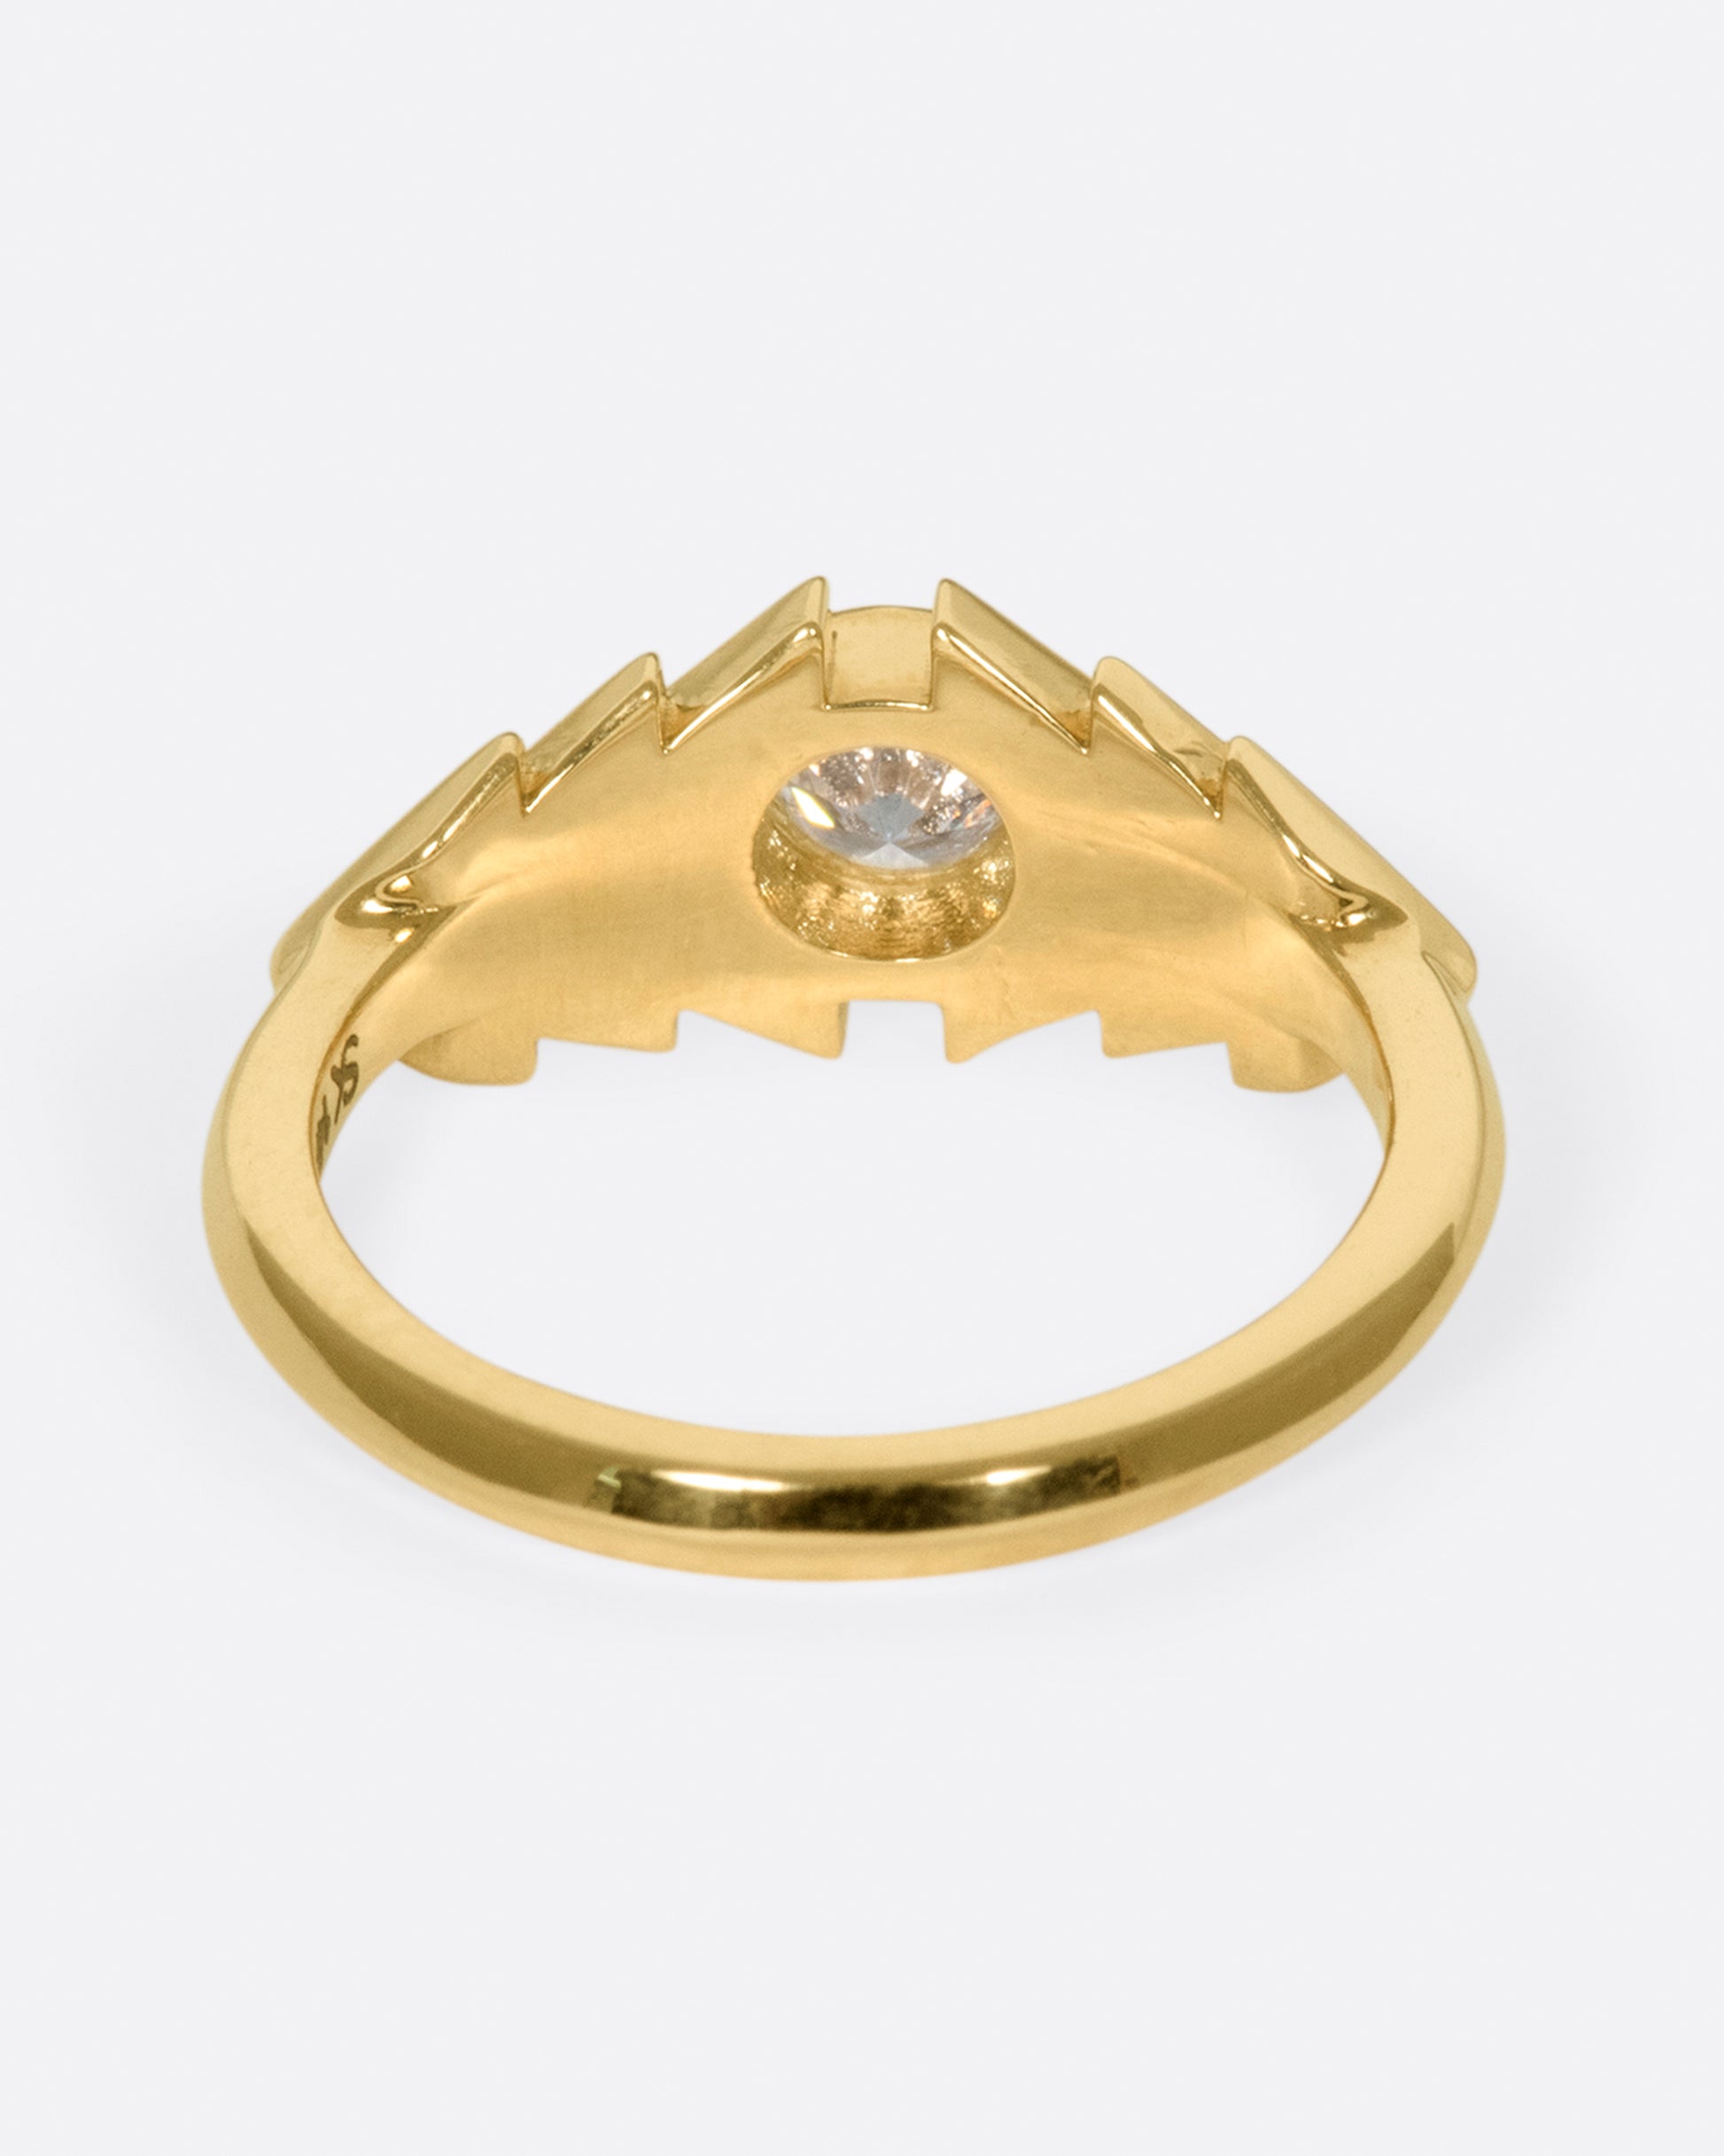 This ring takes cues from tribal kilim pieces, featuring a round diamond contrasting with a repetitive triangular motif